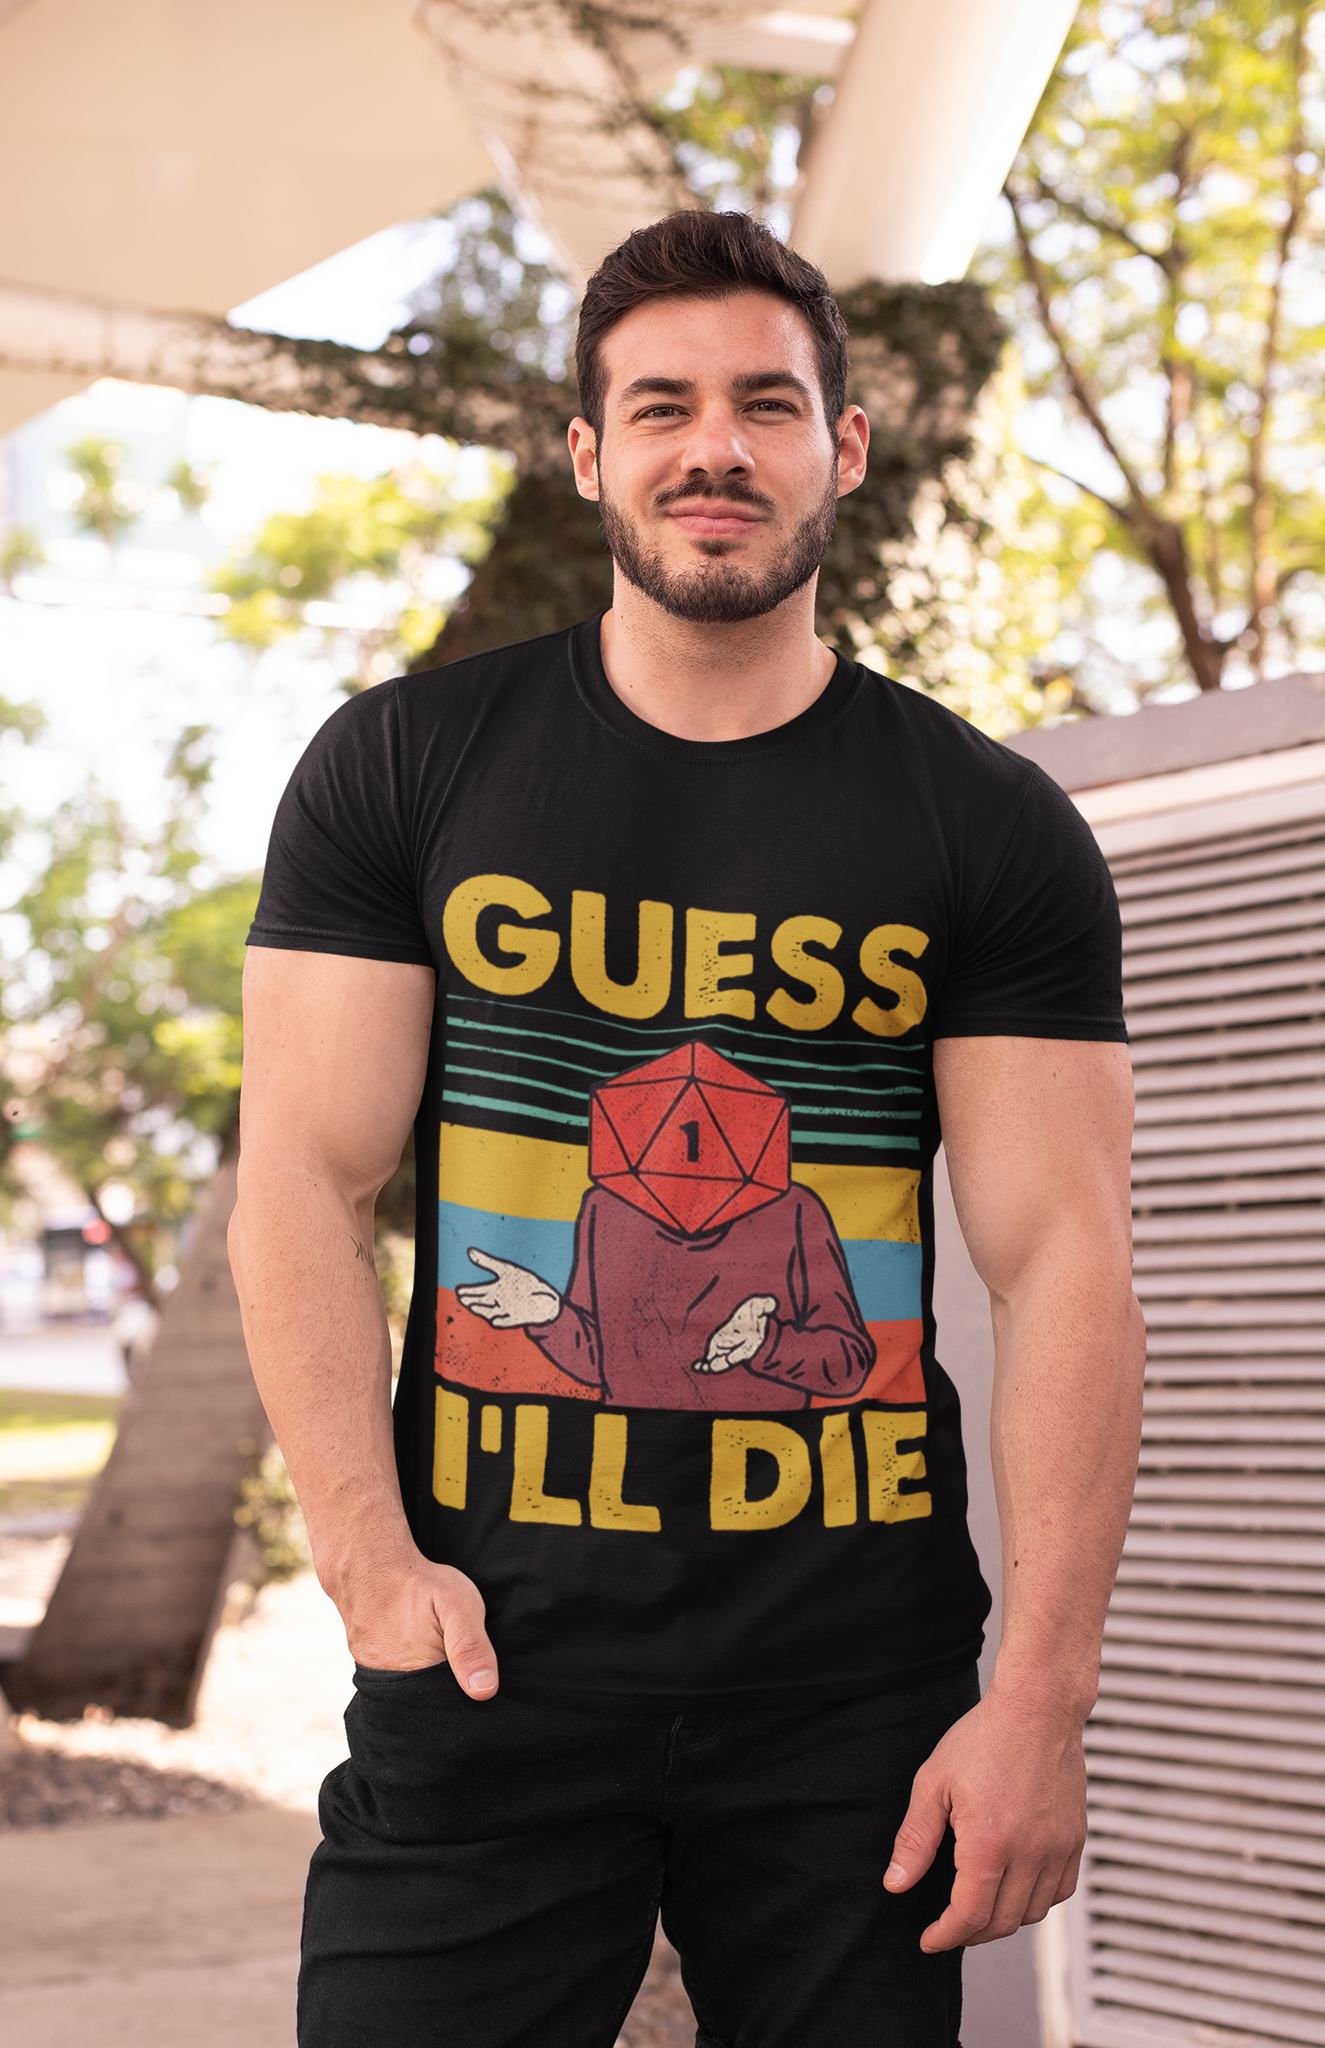 Dungeon And Dragon T Shirt, Guess Ill Die DND T Shirt, RPG Dice Games Tshirt